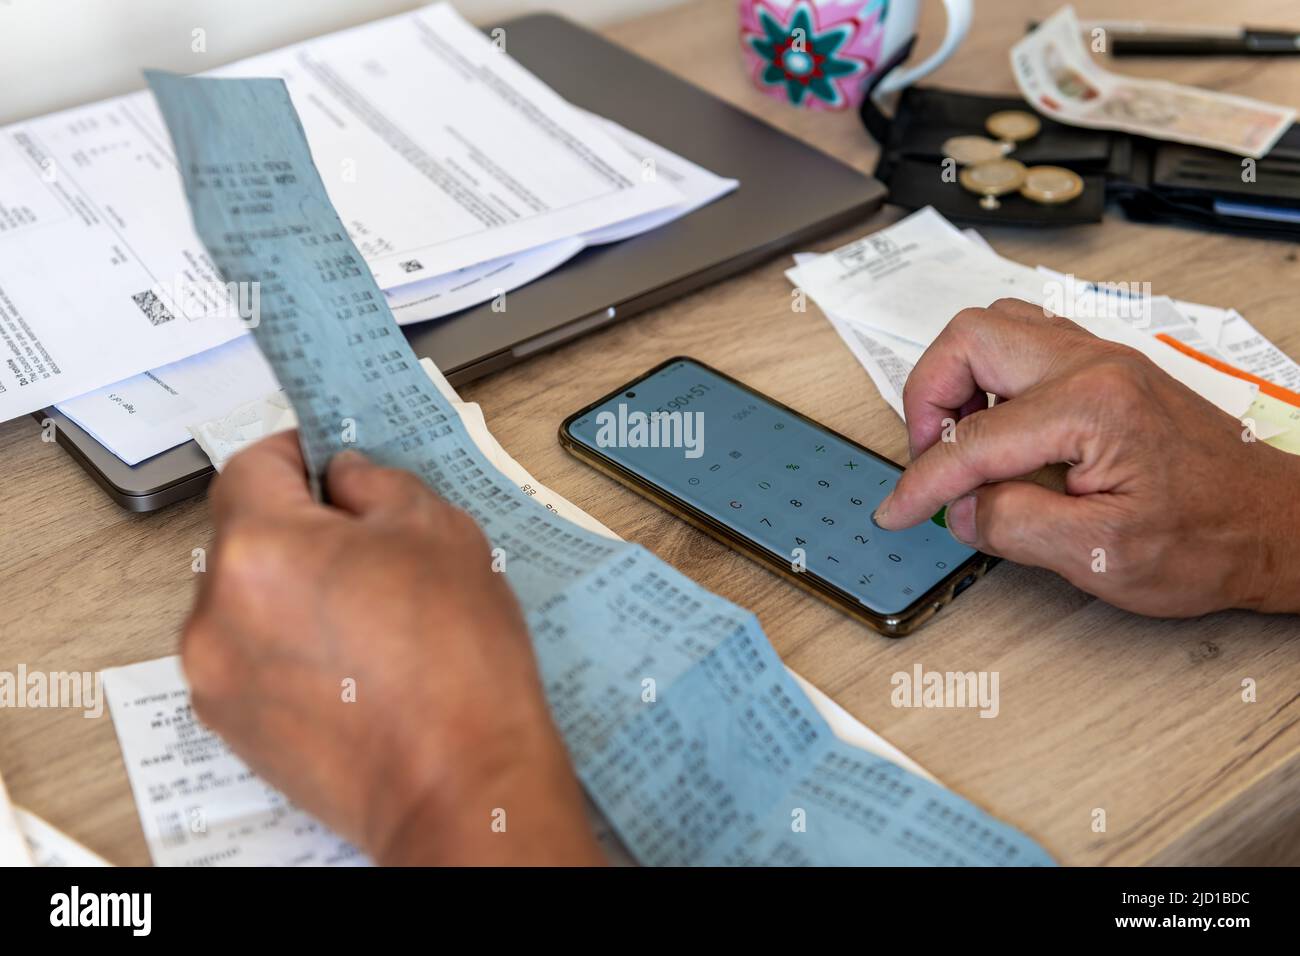 A person calculating the cost of living with a phone calculator and a desk full of bills and till receipts. Stock Photo